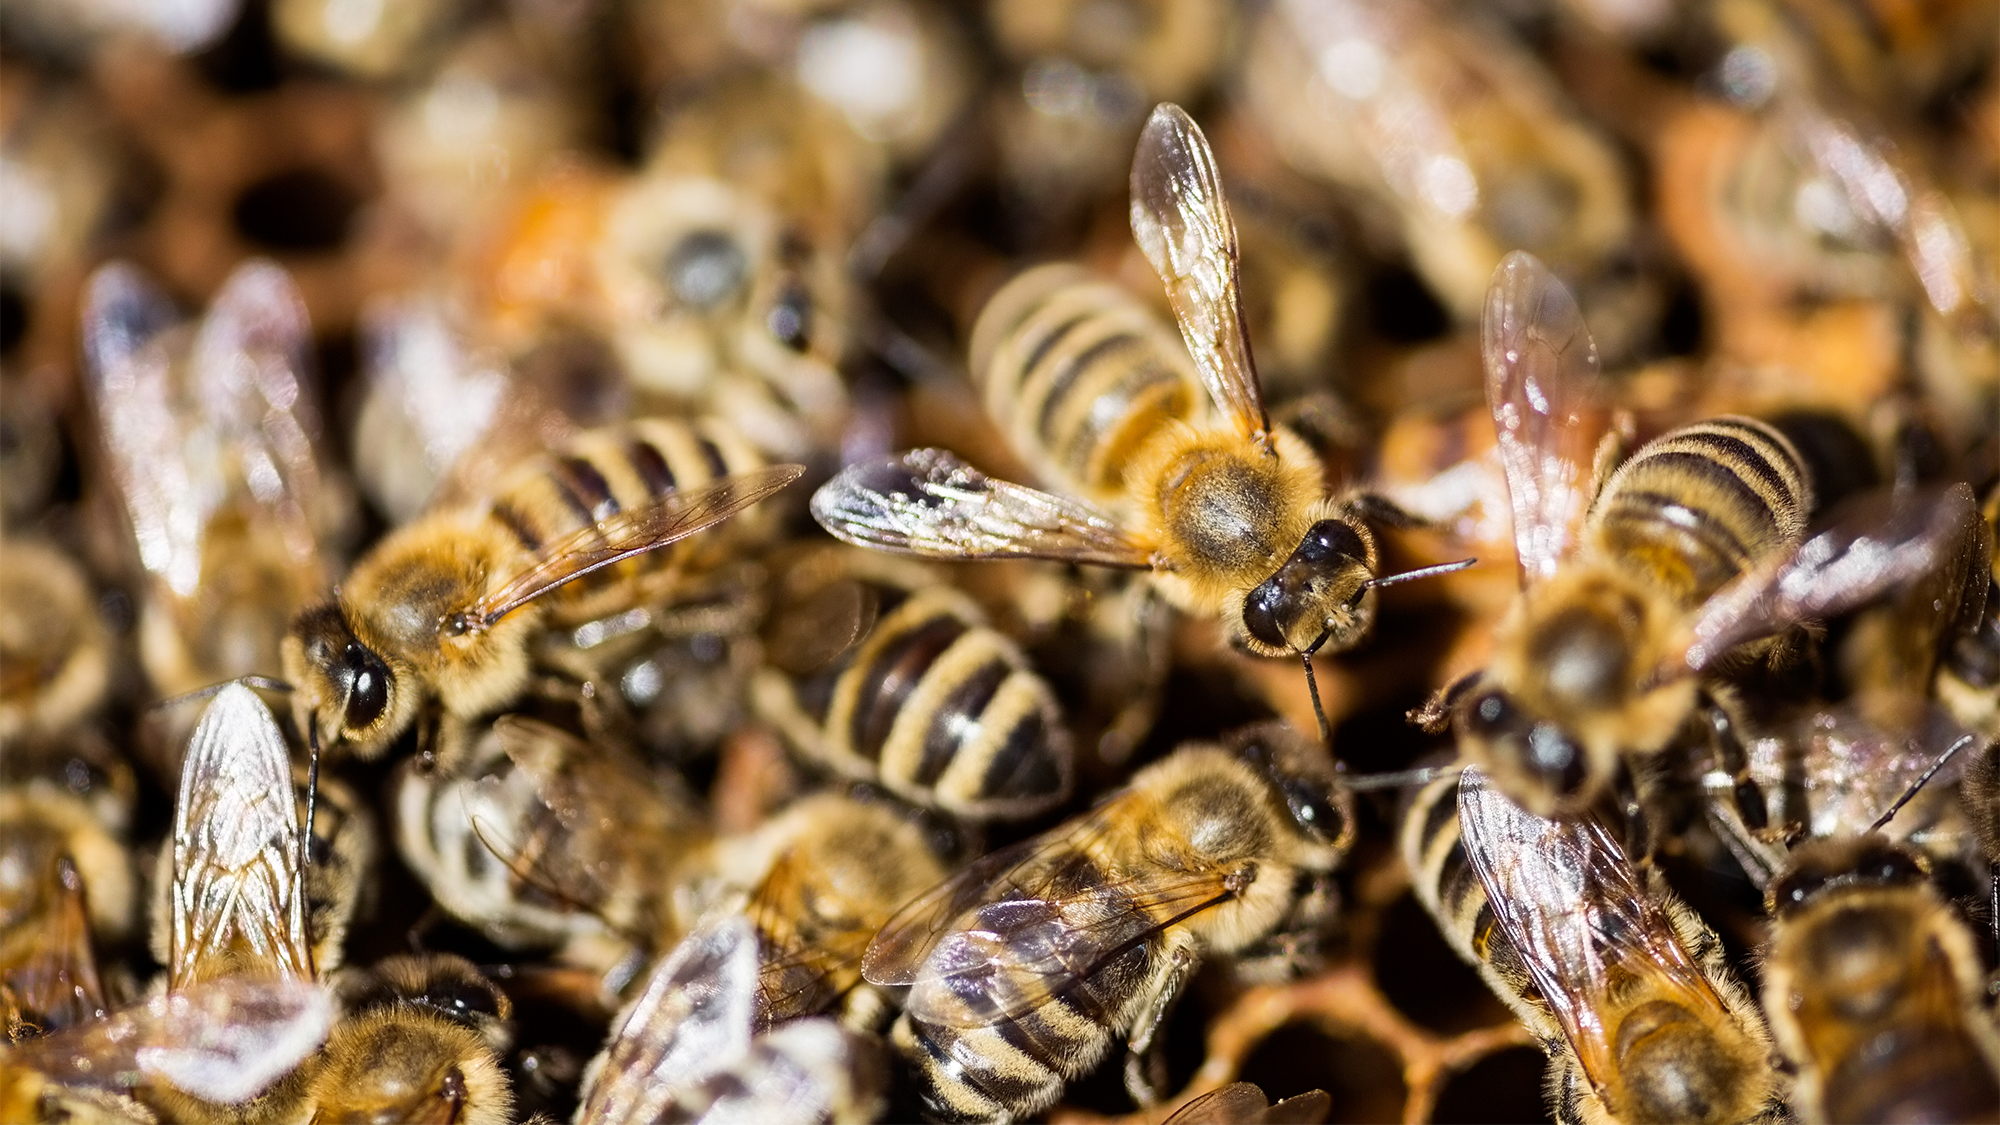 Older bees teach younger bees the ‘waggle dance’